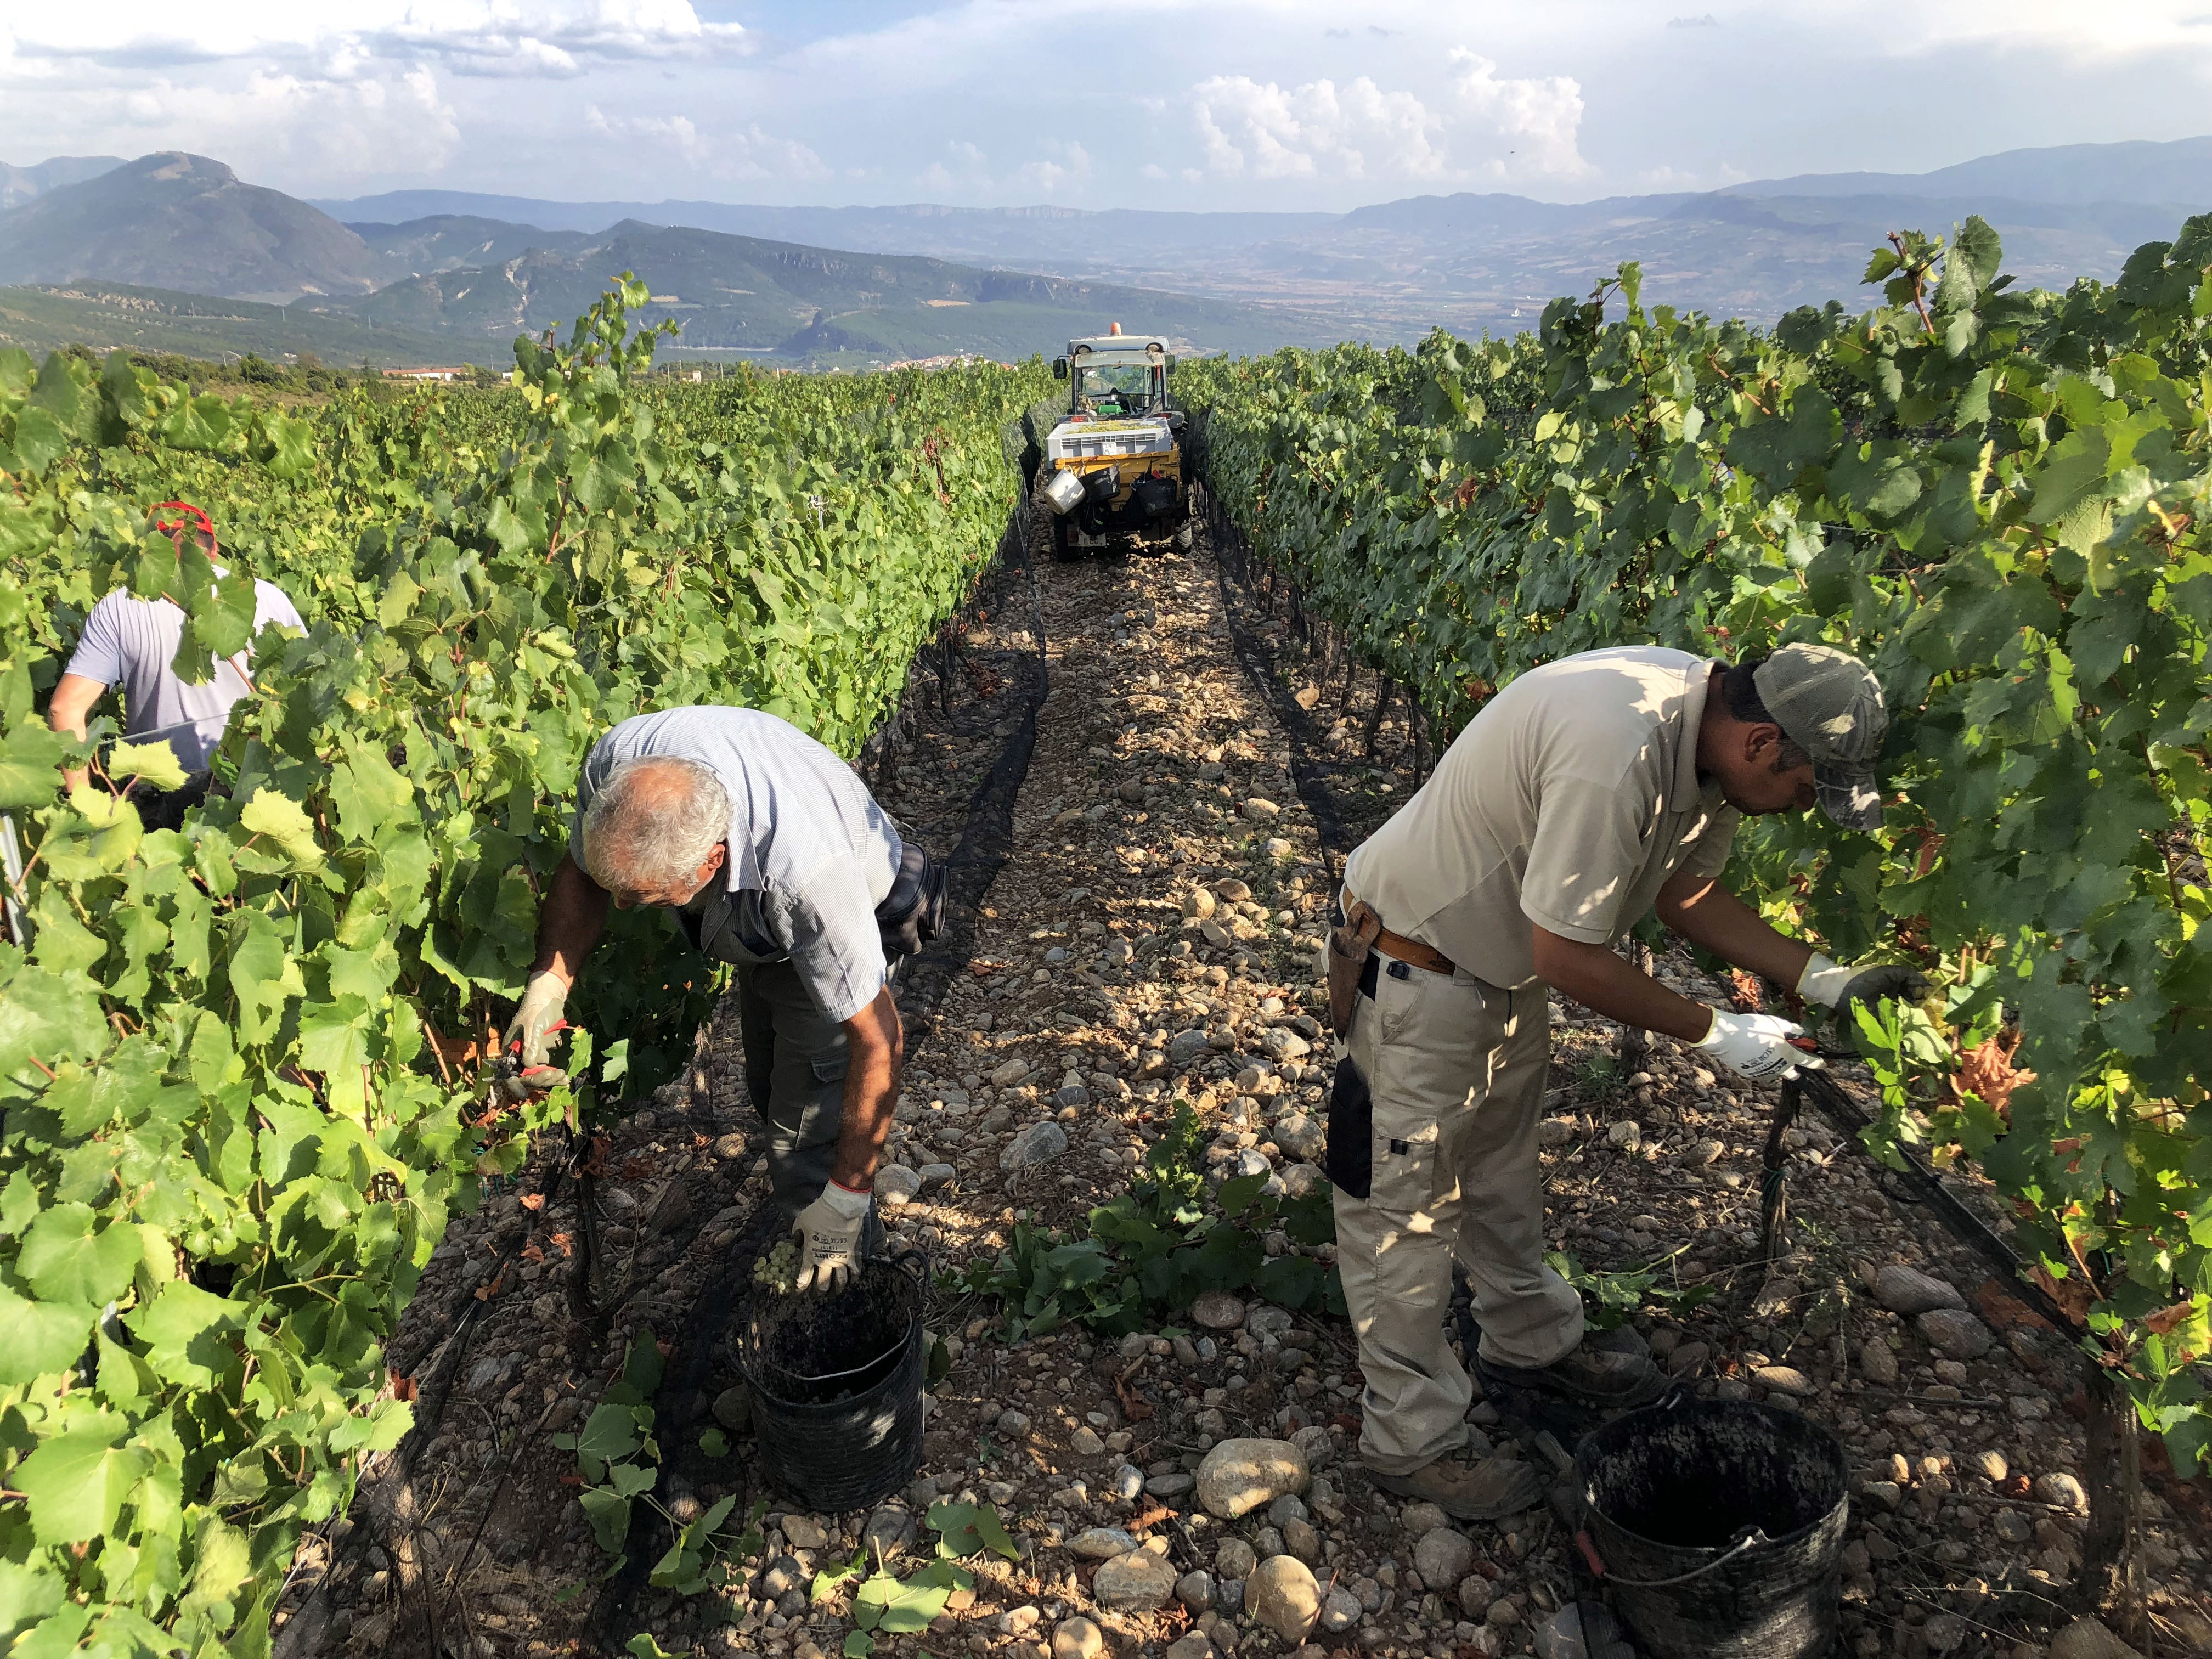 Grape picking in the Llerrida region where grapes grow at high altitude to protect against heat